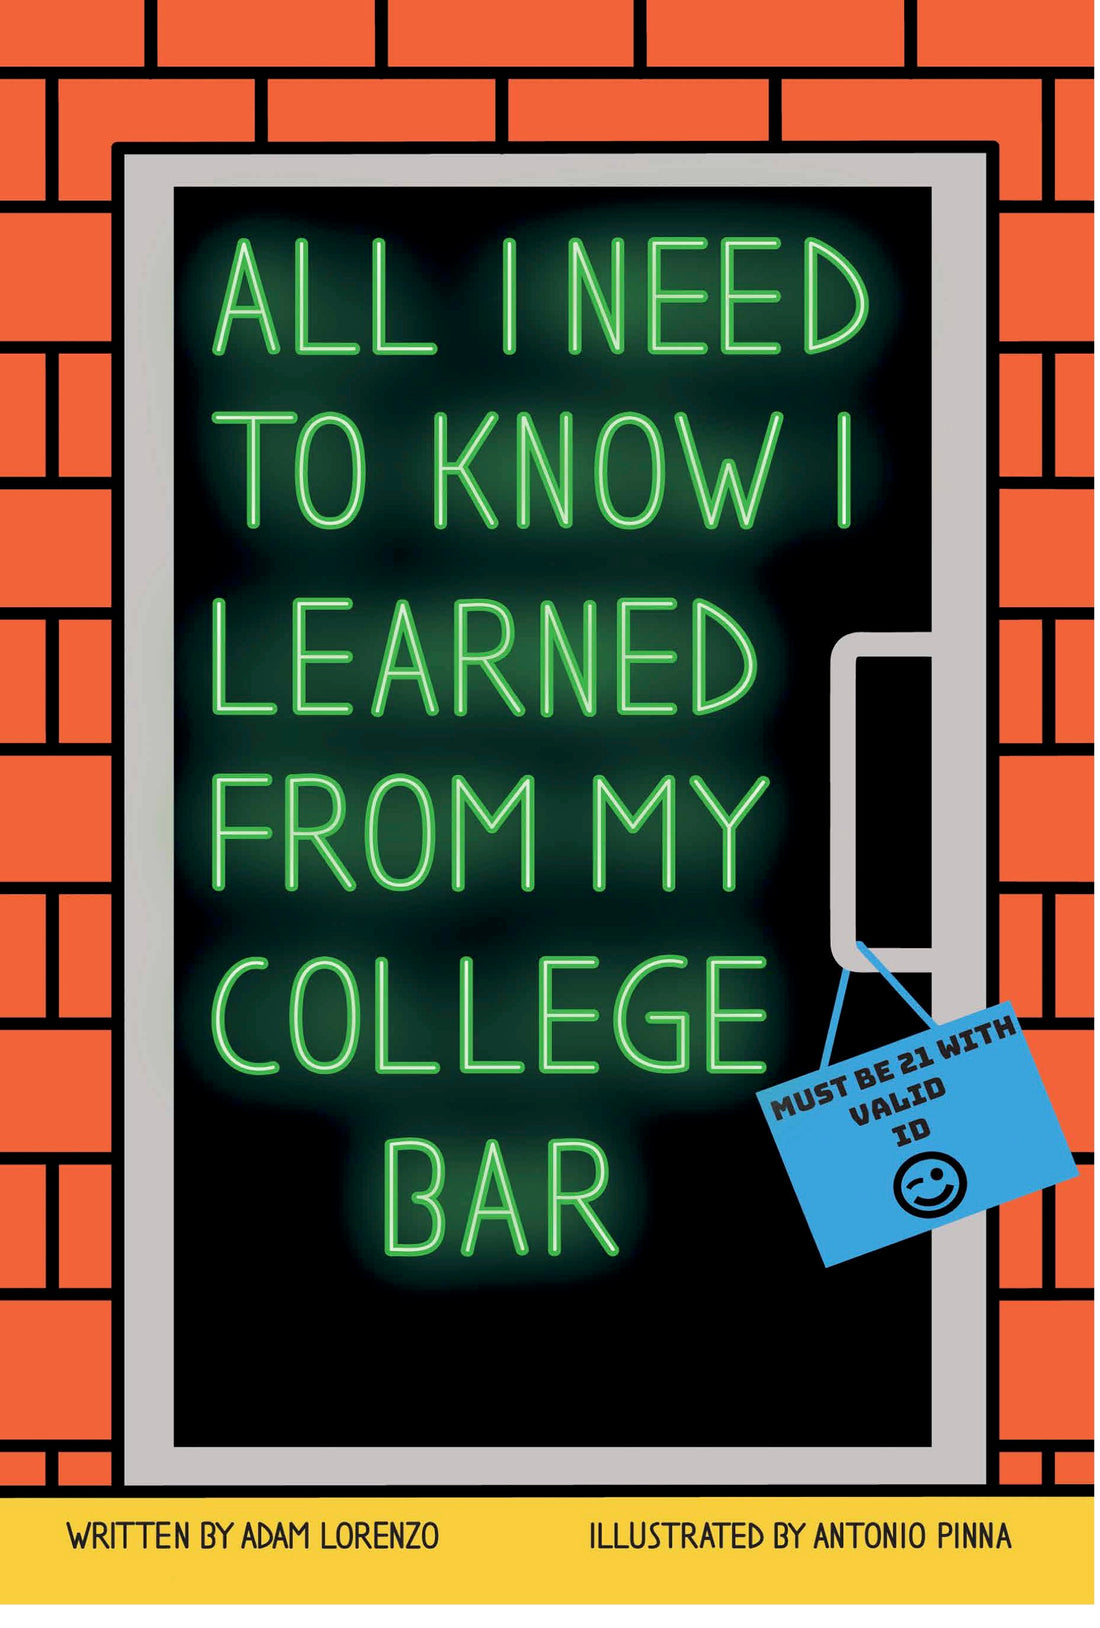 "All I Need To Know I Learned From My College Bar" - Best-Selling College Survival Guide